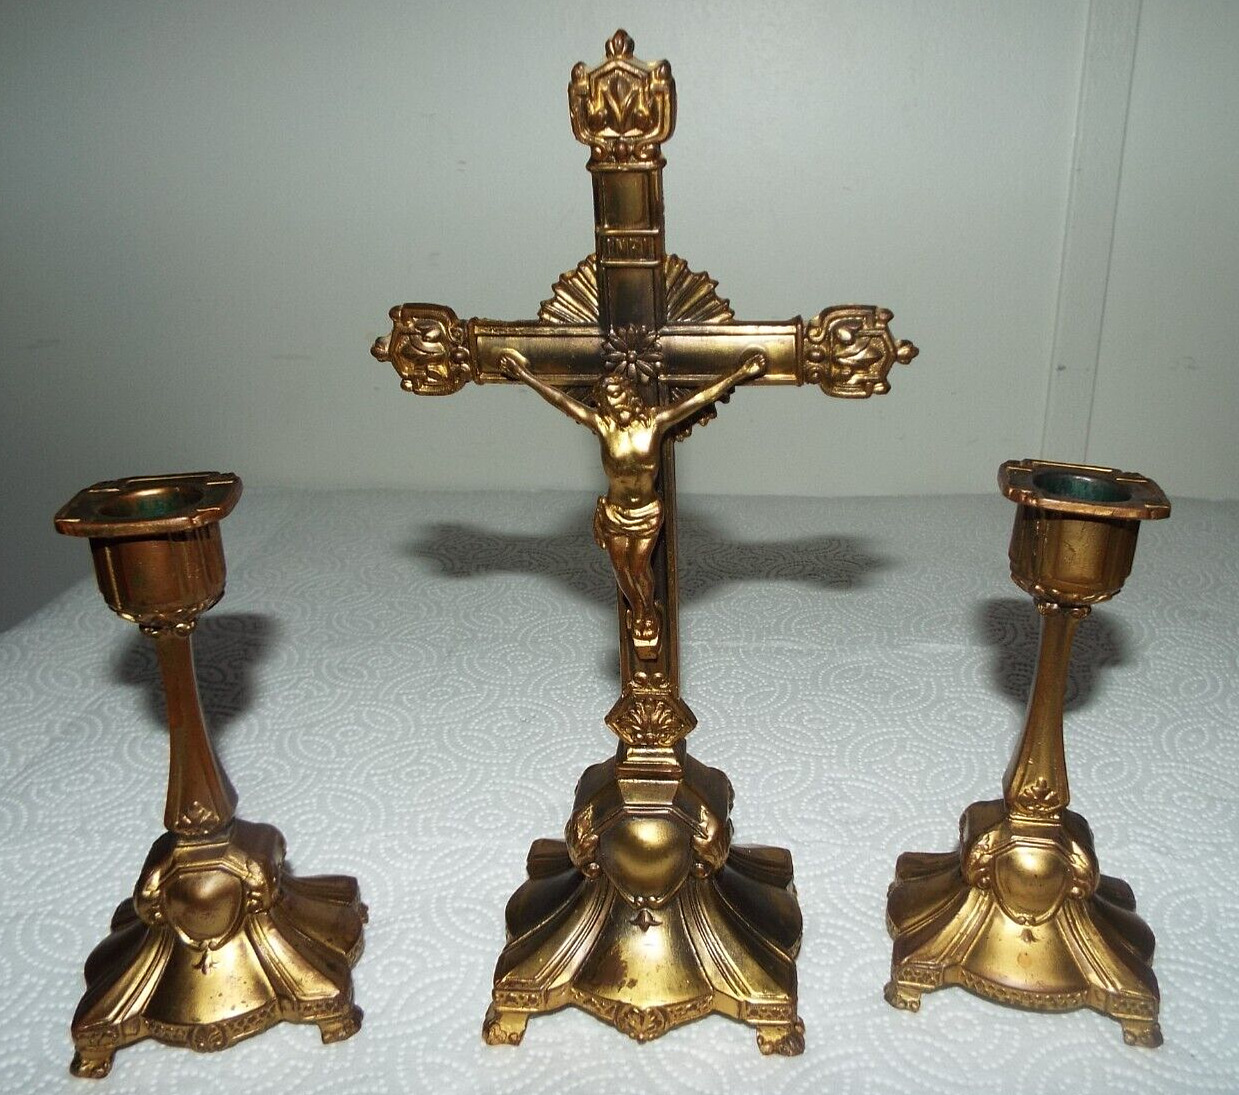 VINTAGE 3 PC. GOLD ALTAR SET WITH CRUCIFIX READ